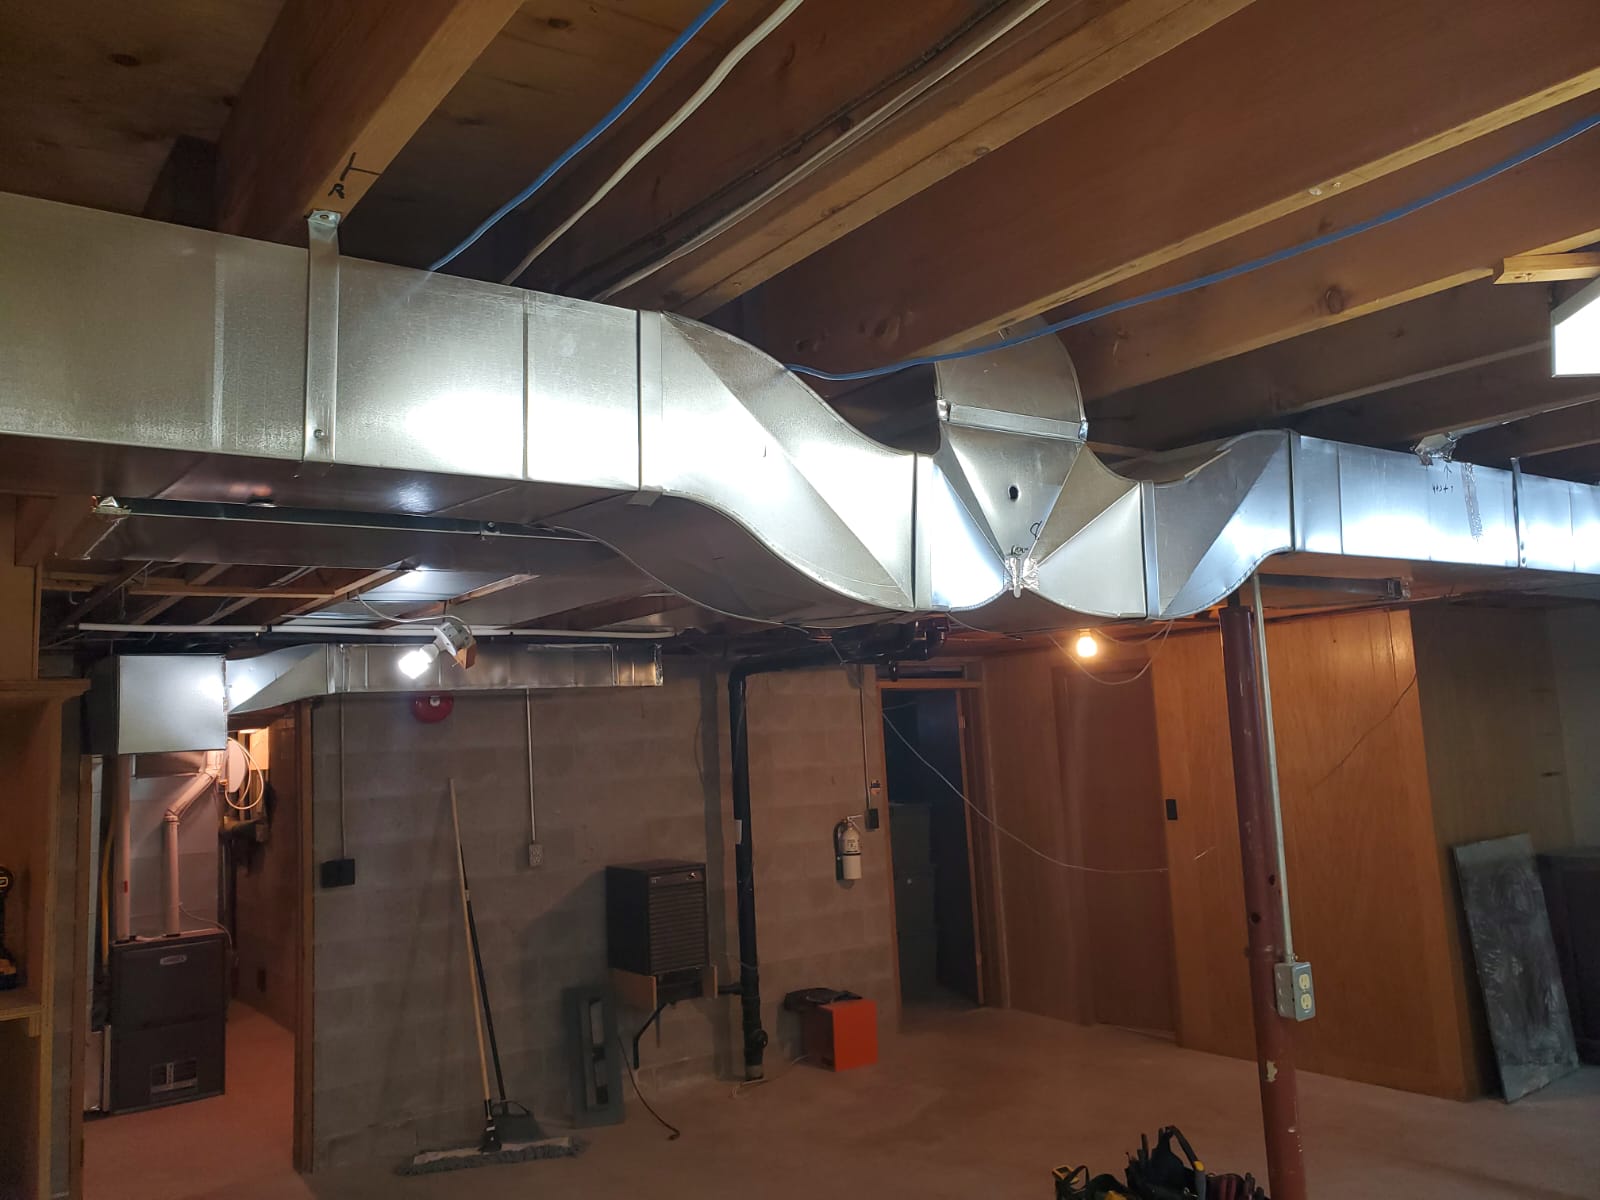 Duct work Installation | Basement heating duct installation | Basement Ductwork